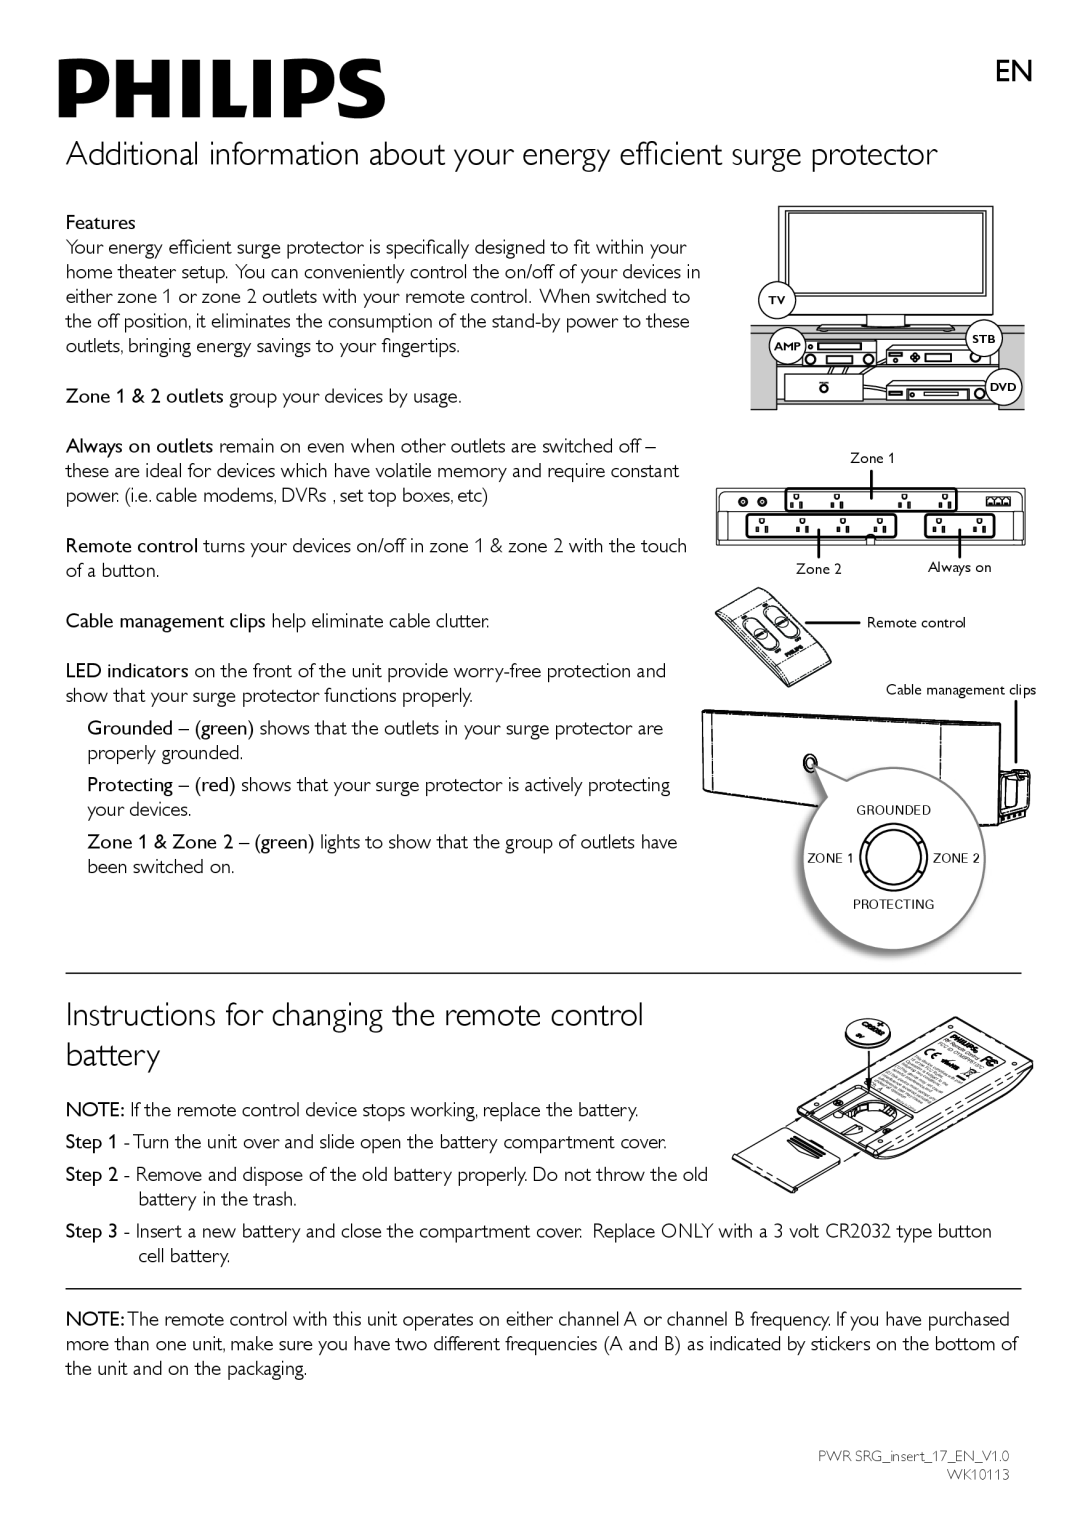 Philips SPP5107C/17, Wk10113 manual Additional information about your energy efficient surge protector 